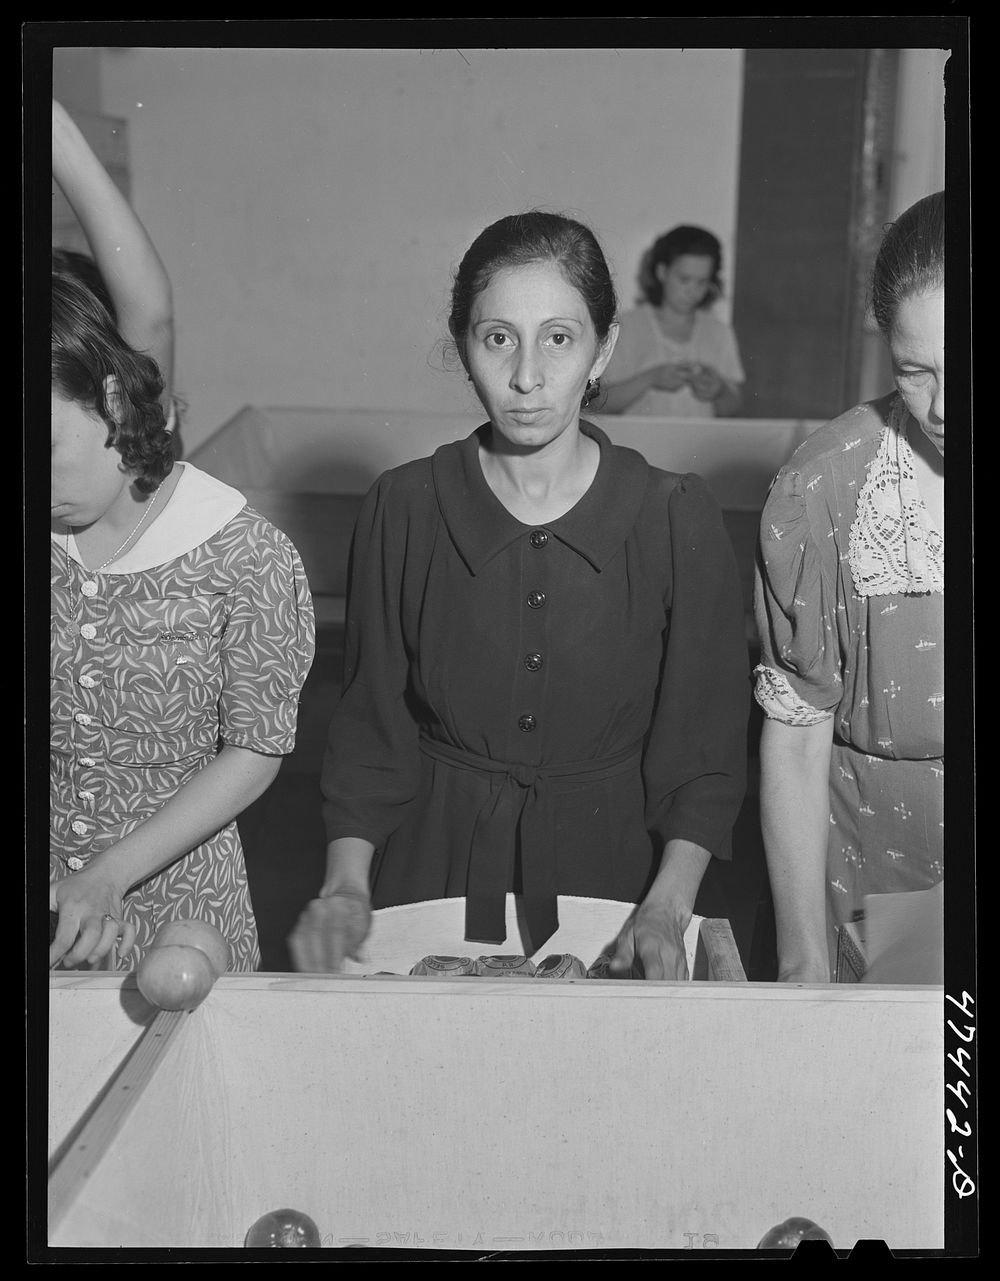 [Untitled photo, possibly related to: Yauco, Puerto Rico. Sorting and packing tomatoes at the Yauco cooperative tomato…